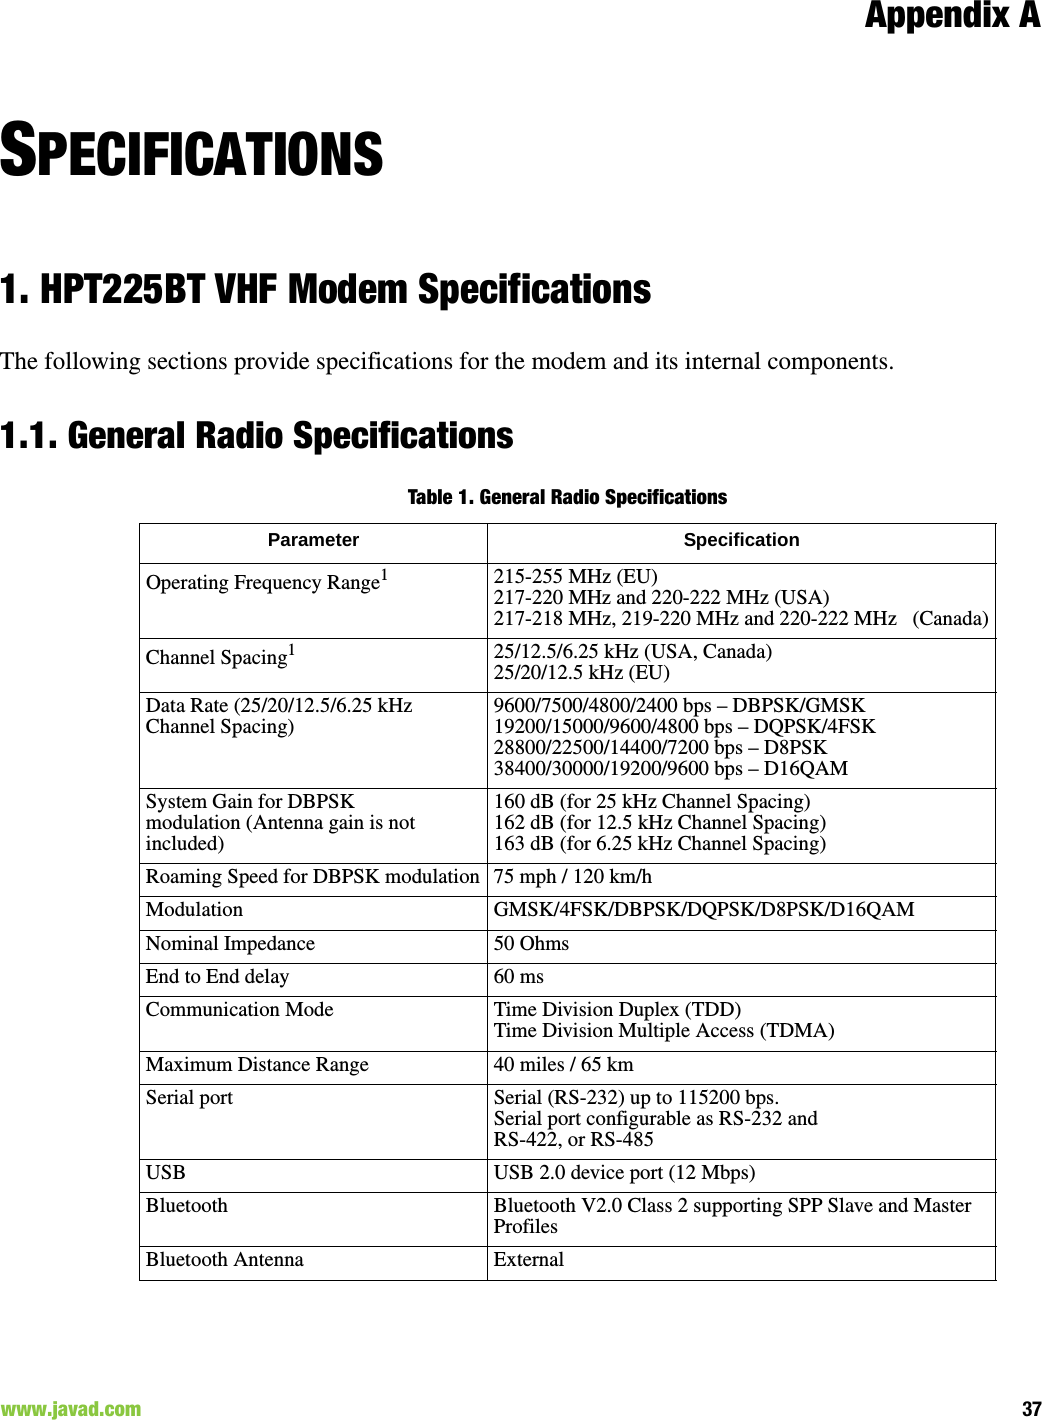 Appendix A37www.javad.com                                                                                                                                              SPECIFICATIONS1. HPT225BT VHF Modem SpecificationsThe following sections provide specifications for the modem and its internal components.1.1. General Radio SpecificationsTable 1. General Radio Specifications Parameter SpecificationOperating Frequency Range1 215-255 MHz (EU)217-220 MHz and 220-222 MHz (USA)217-218 MHz, 219-220 MHz and 220-222 MHz   (Canada)Channel Spacing125/12.5/6.25 kHz (USA, Canada)25/20/12.5 kHz (EU)Data Rate (25/20/12.5/6.25 kHz Channel Spacing)9600/7500/4800/2400 bps – DBPSK/GMSK19200/15000/9600/4800 bps – DQPSK/4FSK28800/22500/14400/7200 bps – D8PSK38400/30000/19200/9600 bps – D16QAMSystem Gain for DBPSKmodulation (Antenna gain is notincluded)160 dB (for 25 kHz Channel Spacing)162 dB (for 12.5 kHz Channel Spacing)163 dB (for 6.25 kHz Channel Spacing)Roaming Speed for DBPSK modulation 75 mph / 120 km/hModulation GMSK/4FSK/DBPSK/DQPSK/D8PSK/D16QAM Nominal Impedance 50 OhmsEnd to End delay 60 msCommunication Mode Time Division Duplex (TDD)Time Division Multiple Access (TDMA)Maximum Distance Range 40 miles / 65 kmSerial port Serial (RS-232) up to 115200 bps.Serial port configurable as RS-232 and RS-422, or RS-485USB USB 2.0 device port (12 Mbps)Bluetooth Bluetooth V2.0 Class 2 supporting SPP Slave and Master ProfilesBluetooth Antenna External